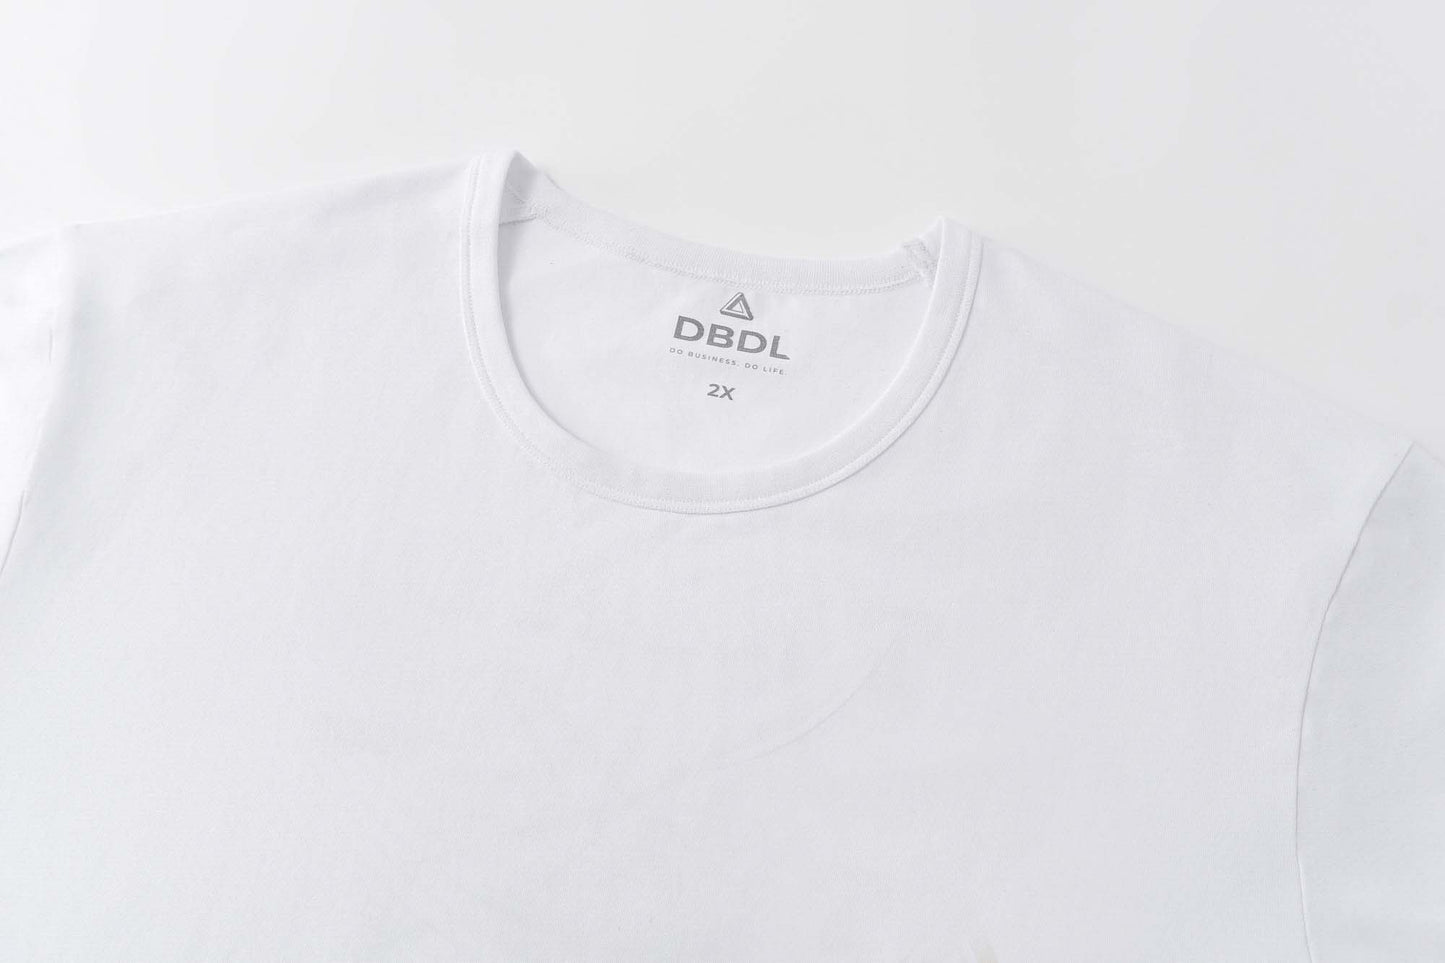 Classic White Spectacle 2.0 Short Sleeve